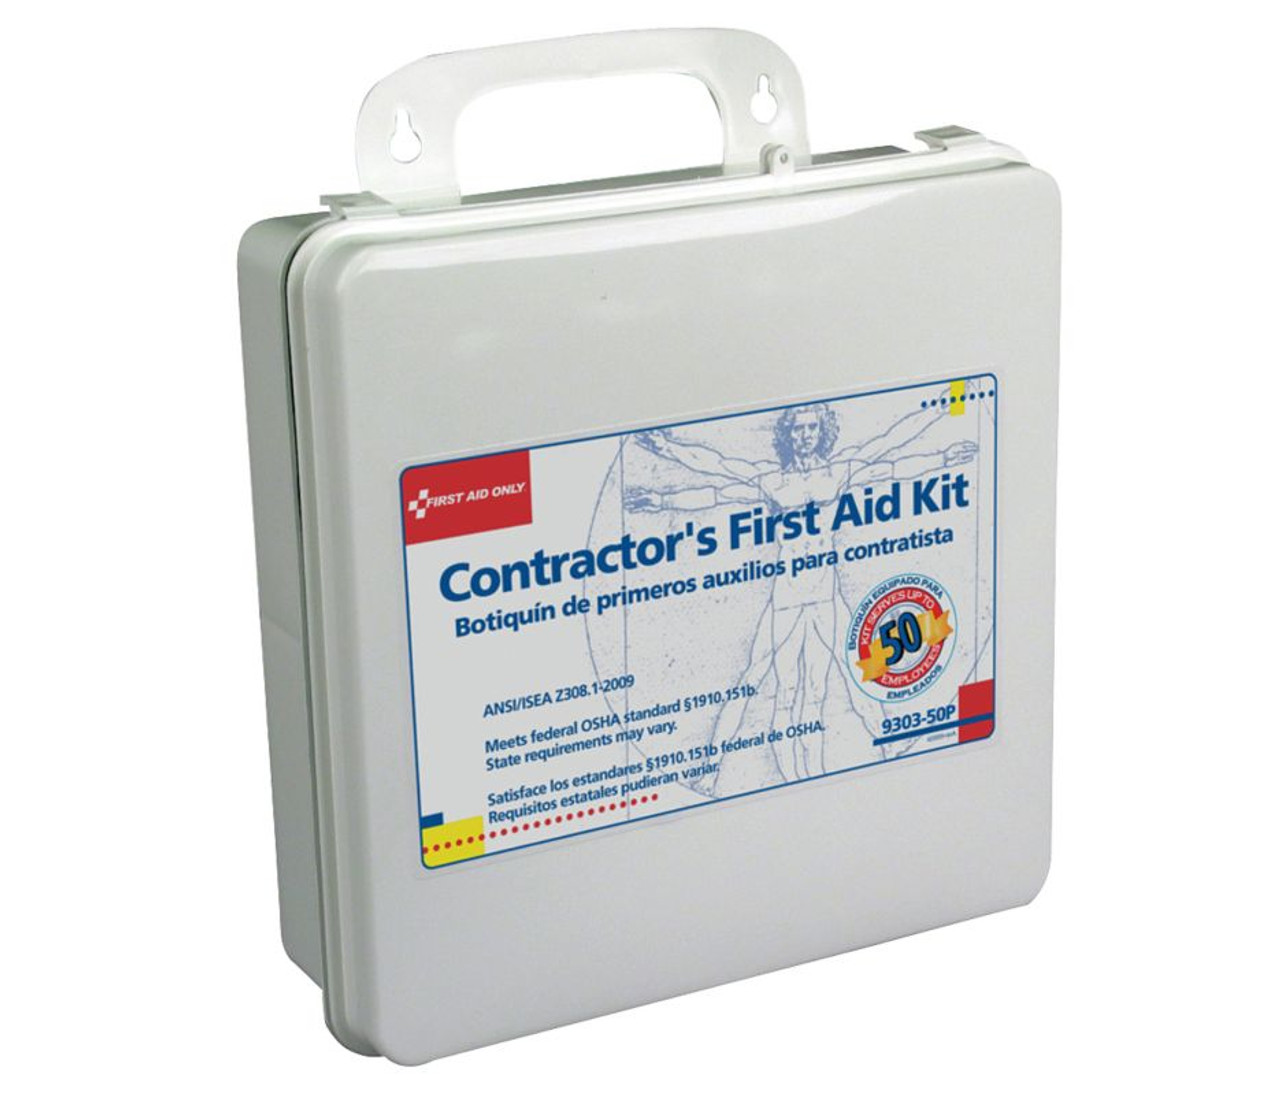 Construction First Aid Kit